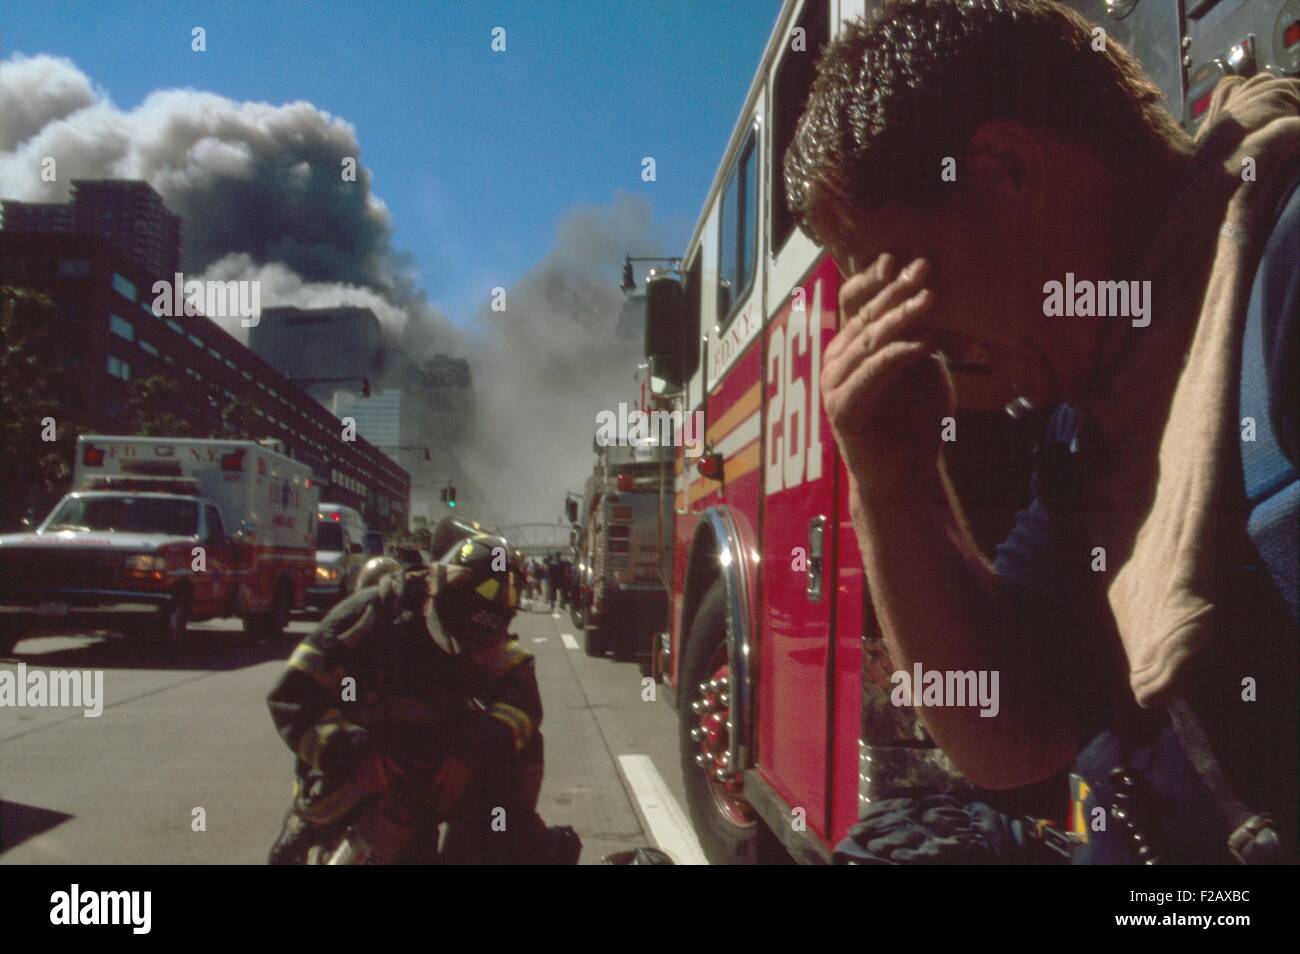 New York City fire fighter north of the collapsed Twin Towers. Behind him are other firemen, fire trucks, and rescue vehicles. In the background is smoke and pulverized building debris of the collapsed North and South Towers of the World Trade Center. New York City, Sept. 11, 2001. (BSLOC 2015 2 41) Stock Photo